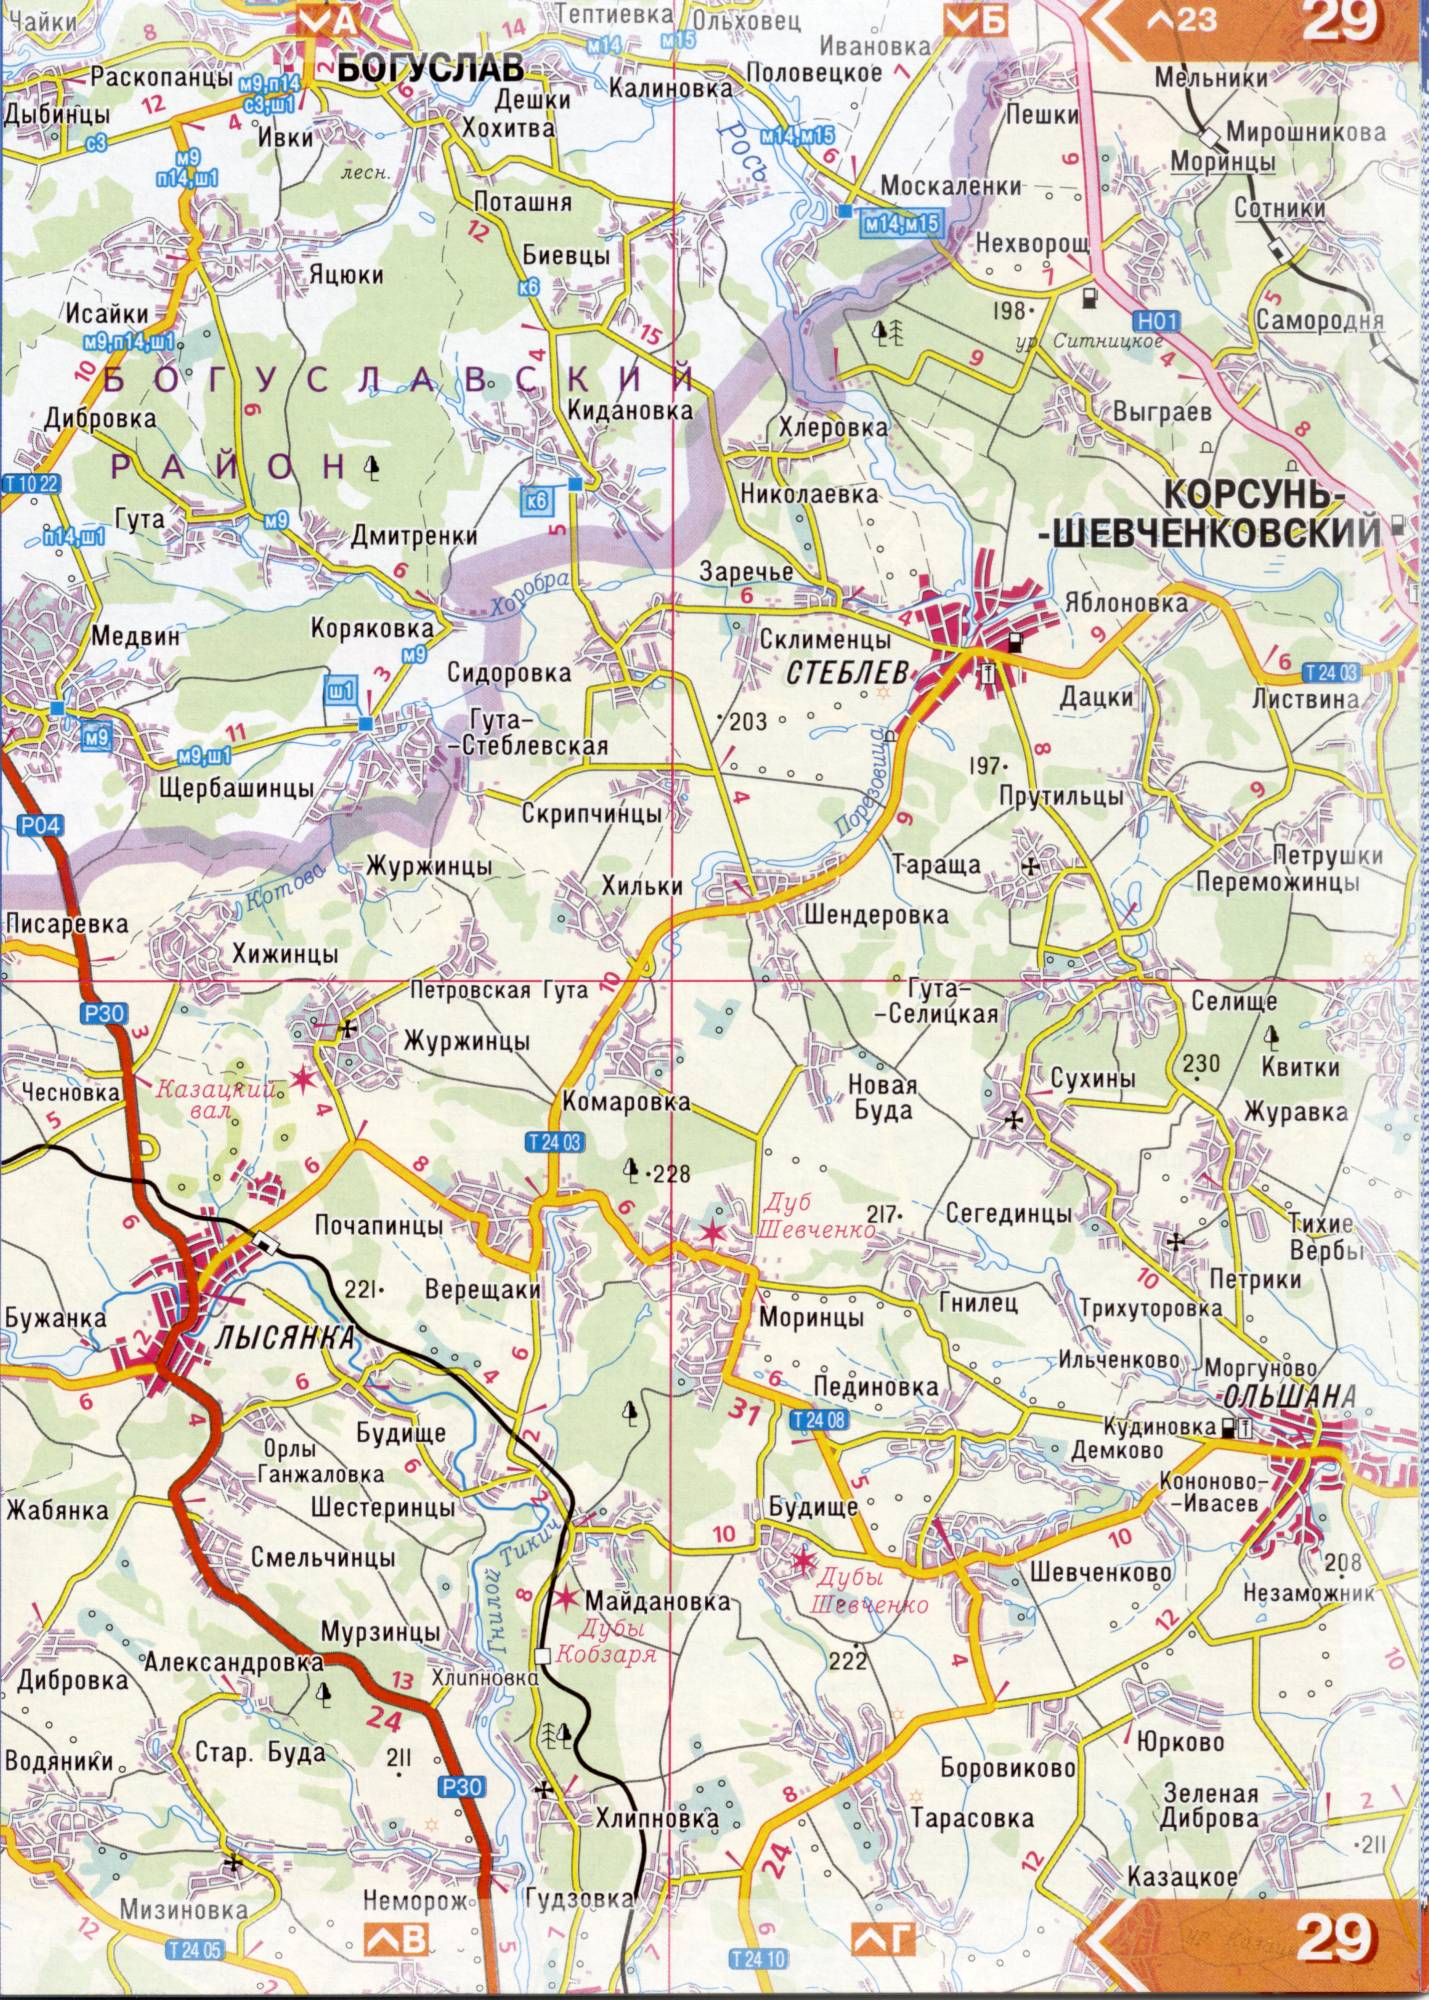 Atlas of the Kiev region. A detailed map of the Kiev region of the atlas of highways. Kyiv region on a detailed map of scale 1cm = 3km. Free, D5 - Bohuslav